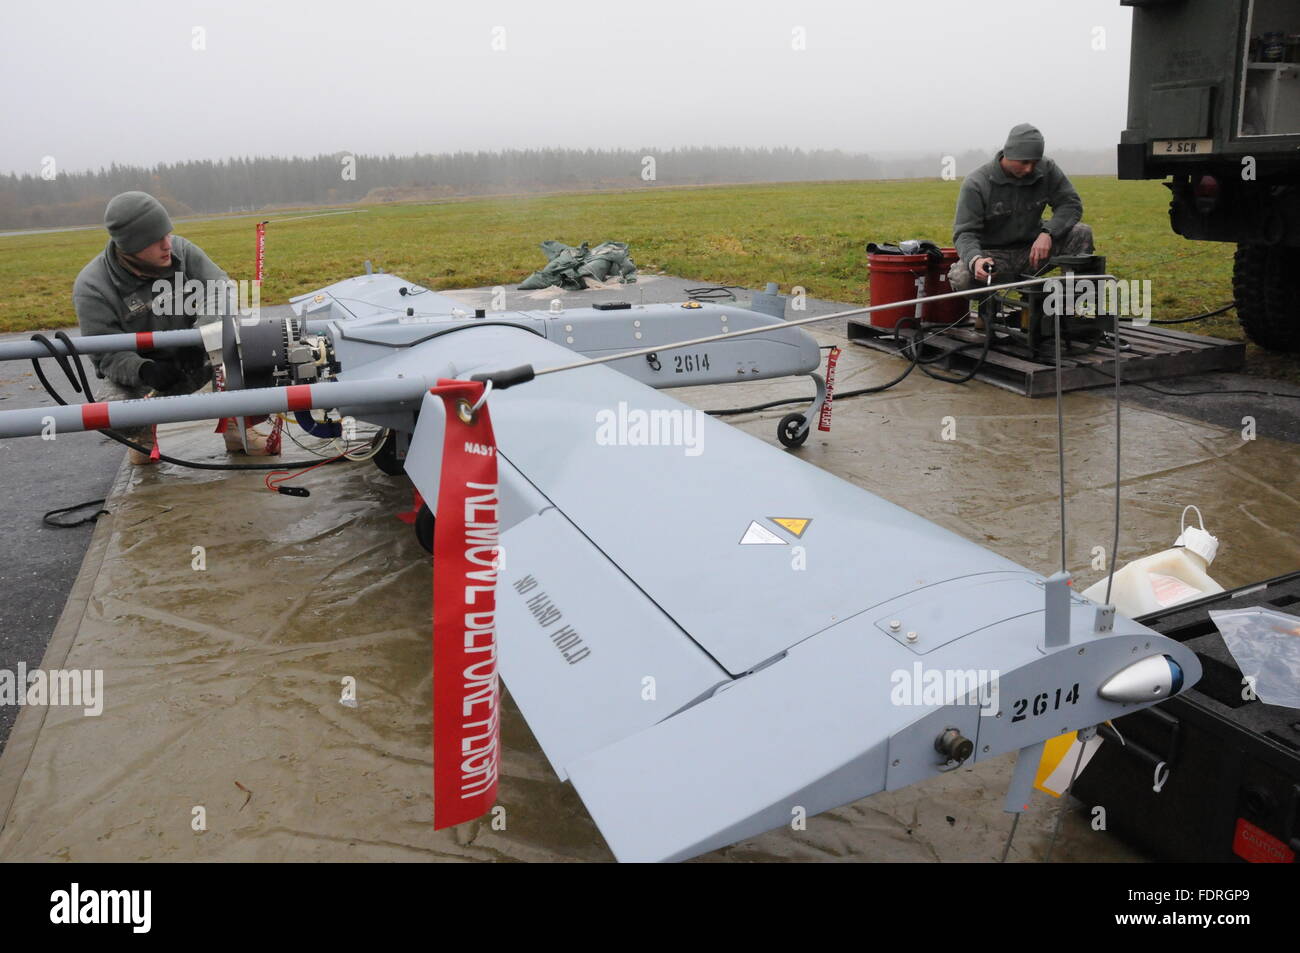 U.S. military unmanned aerial vehicles - UAVs - or as most commonly known - drones. Stock Photo